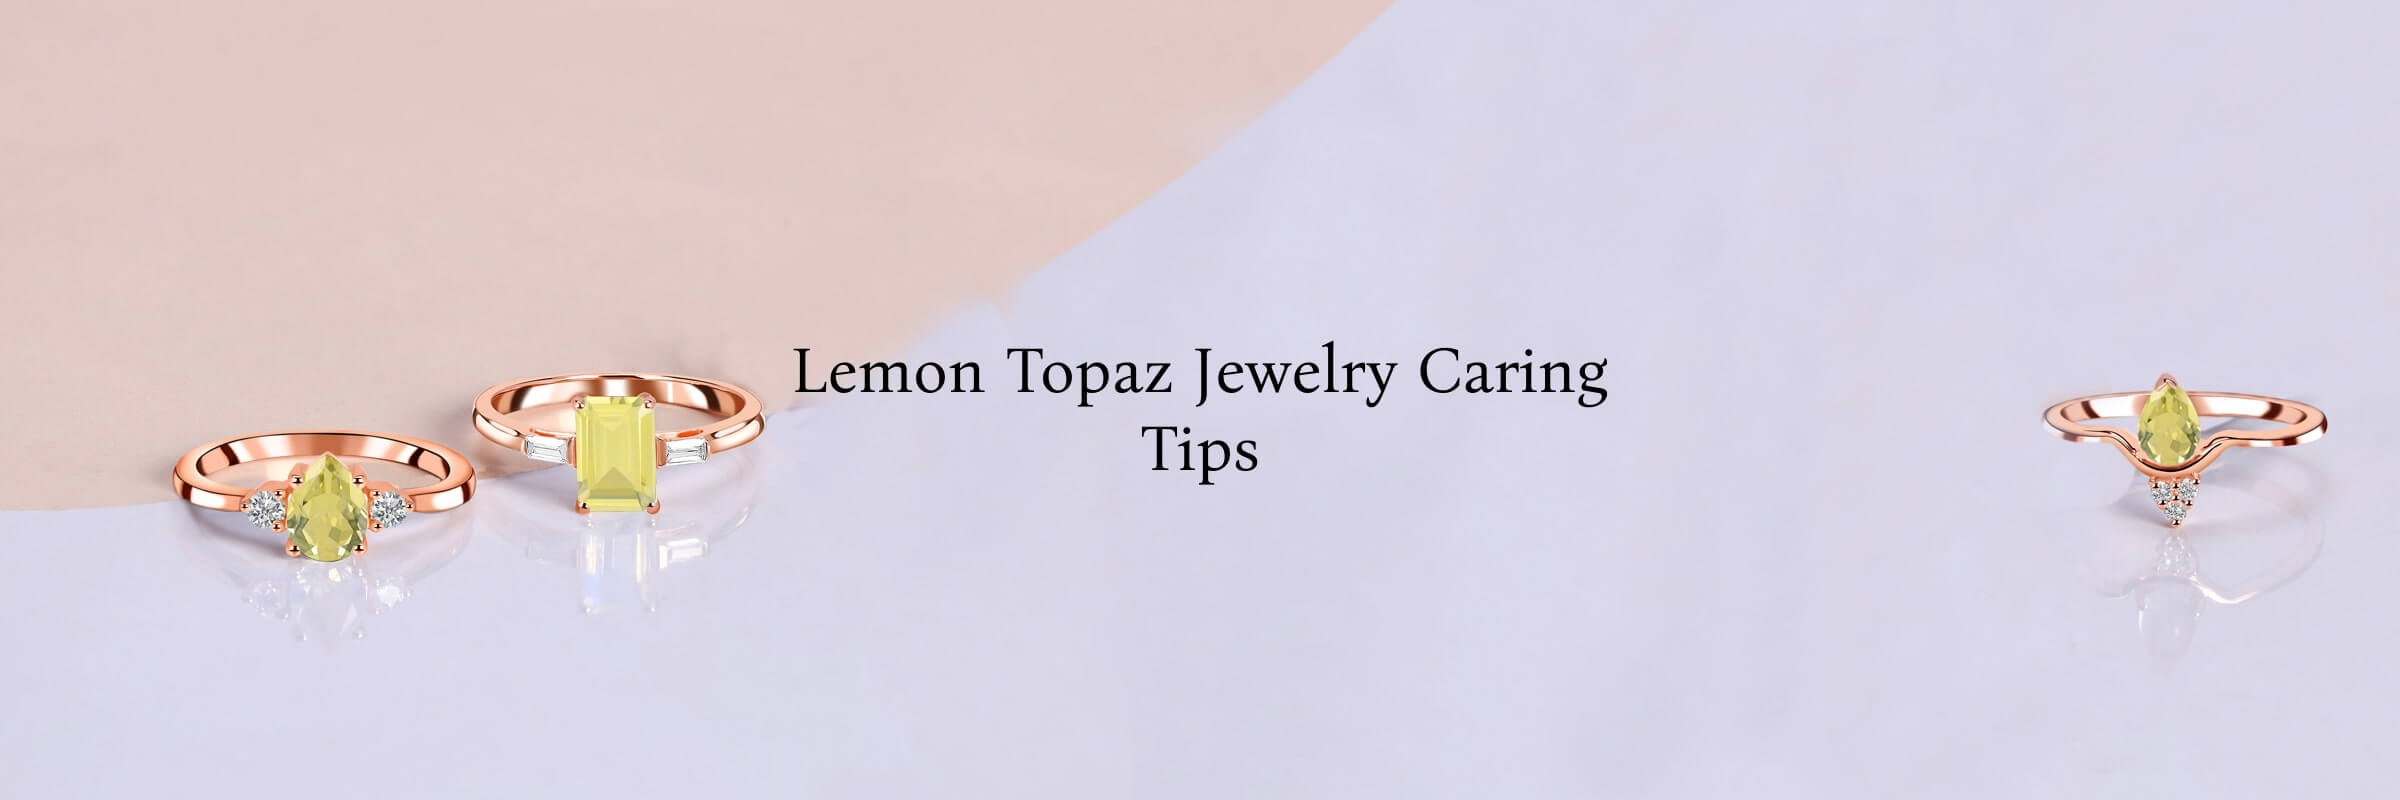 How to Care for Lemon Topaz Jewelry